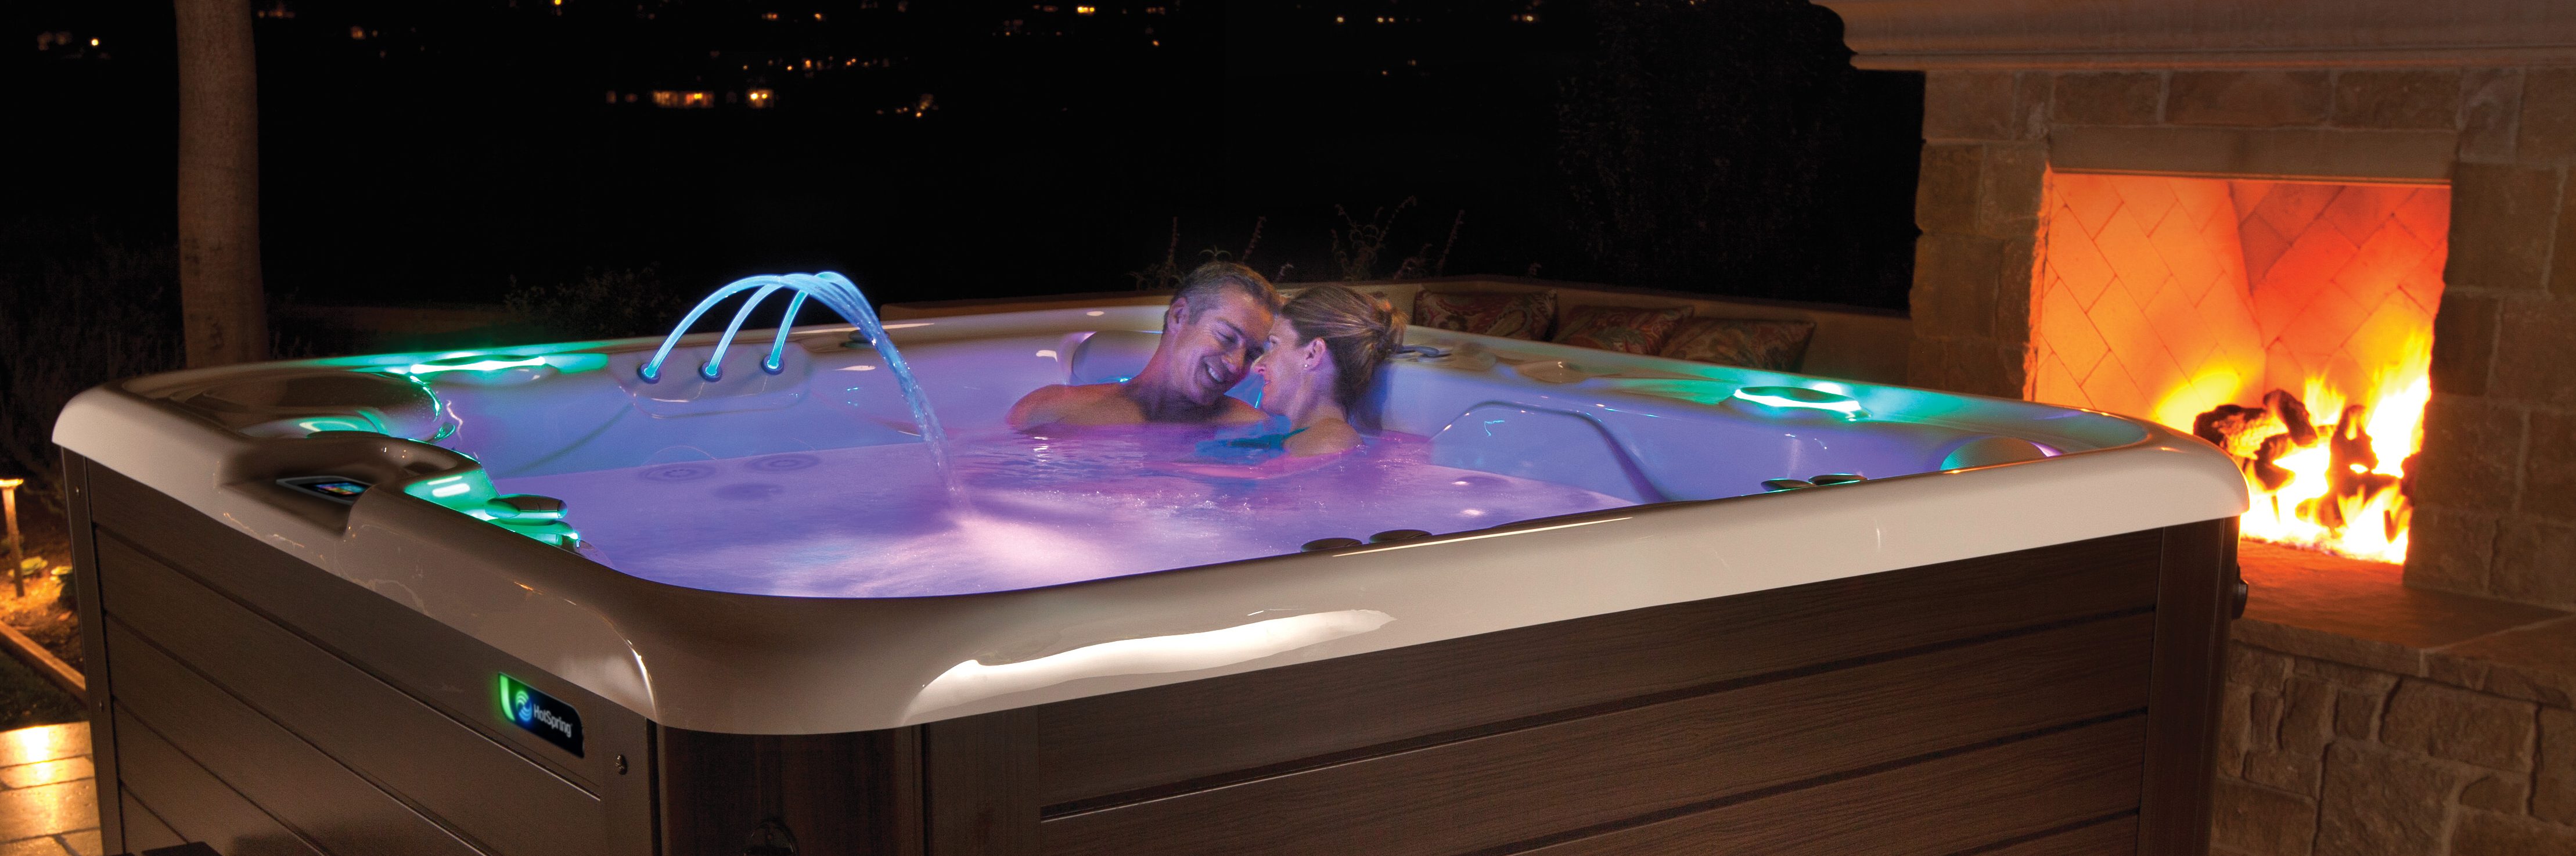 3 Essential Date Night Secrets for the Hot Tub